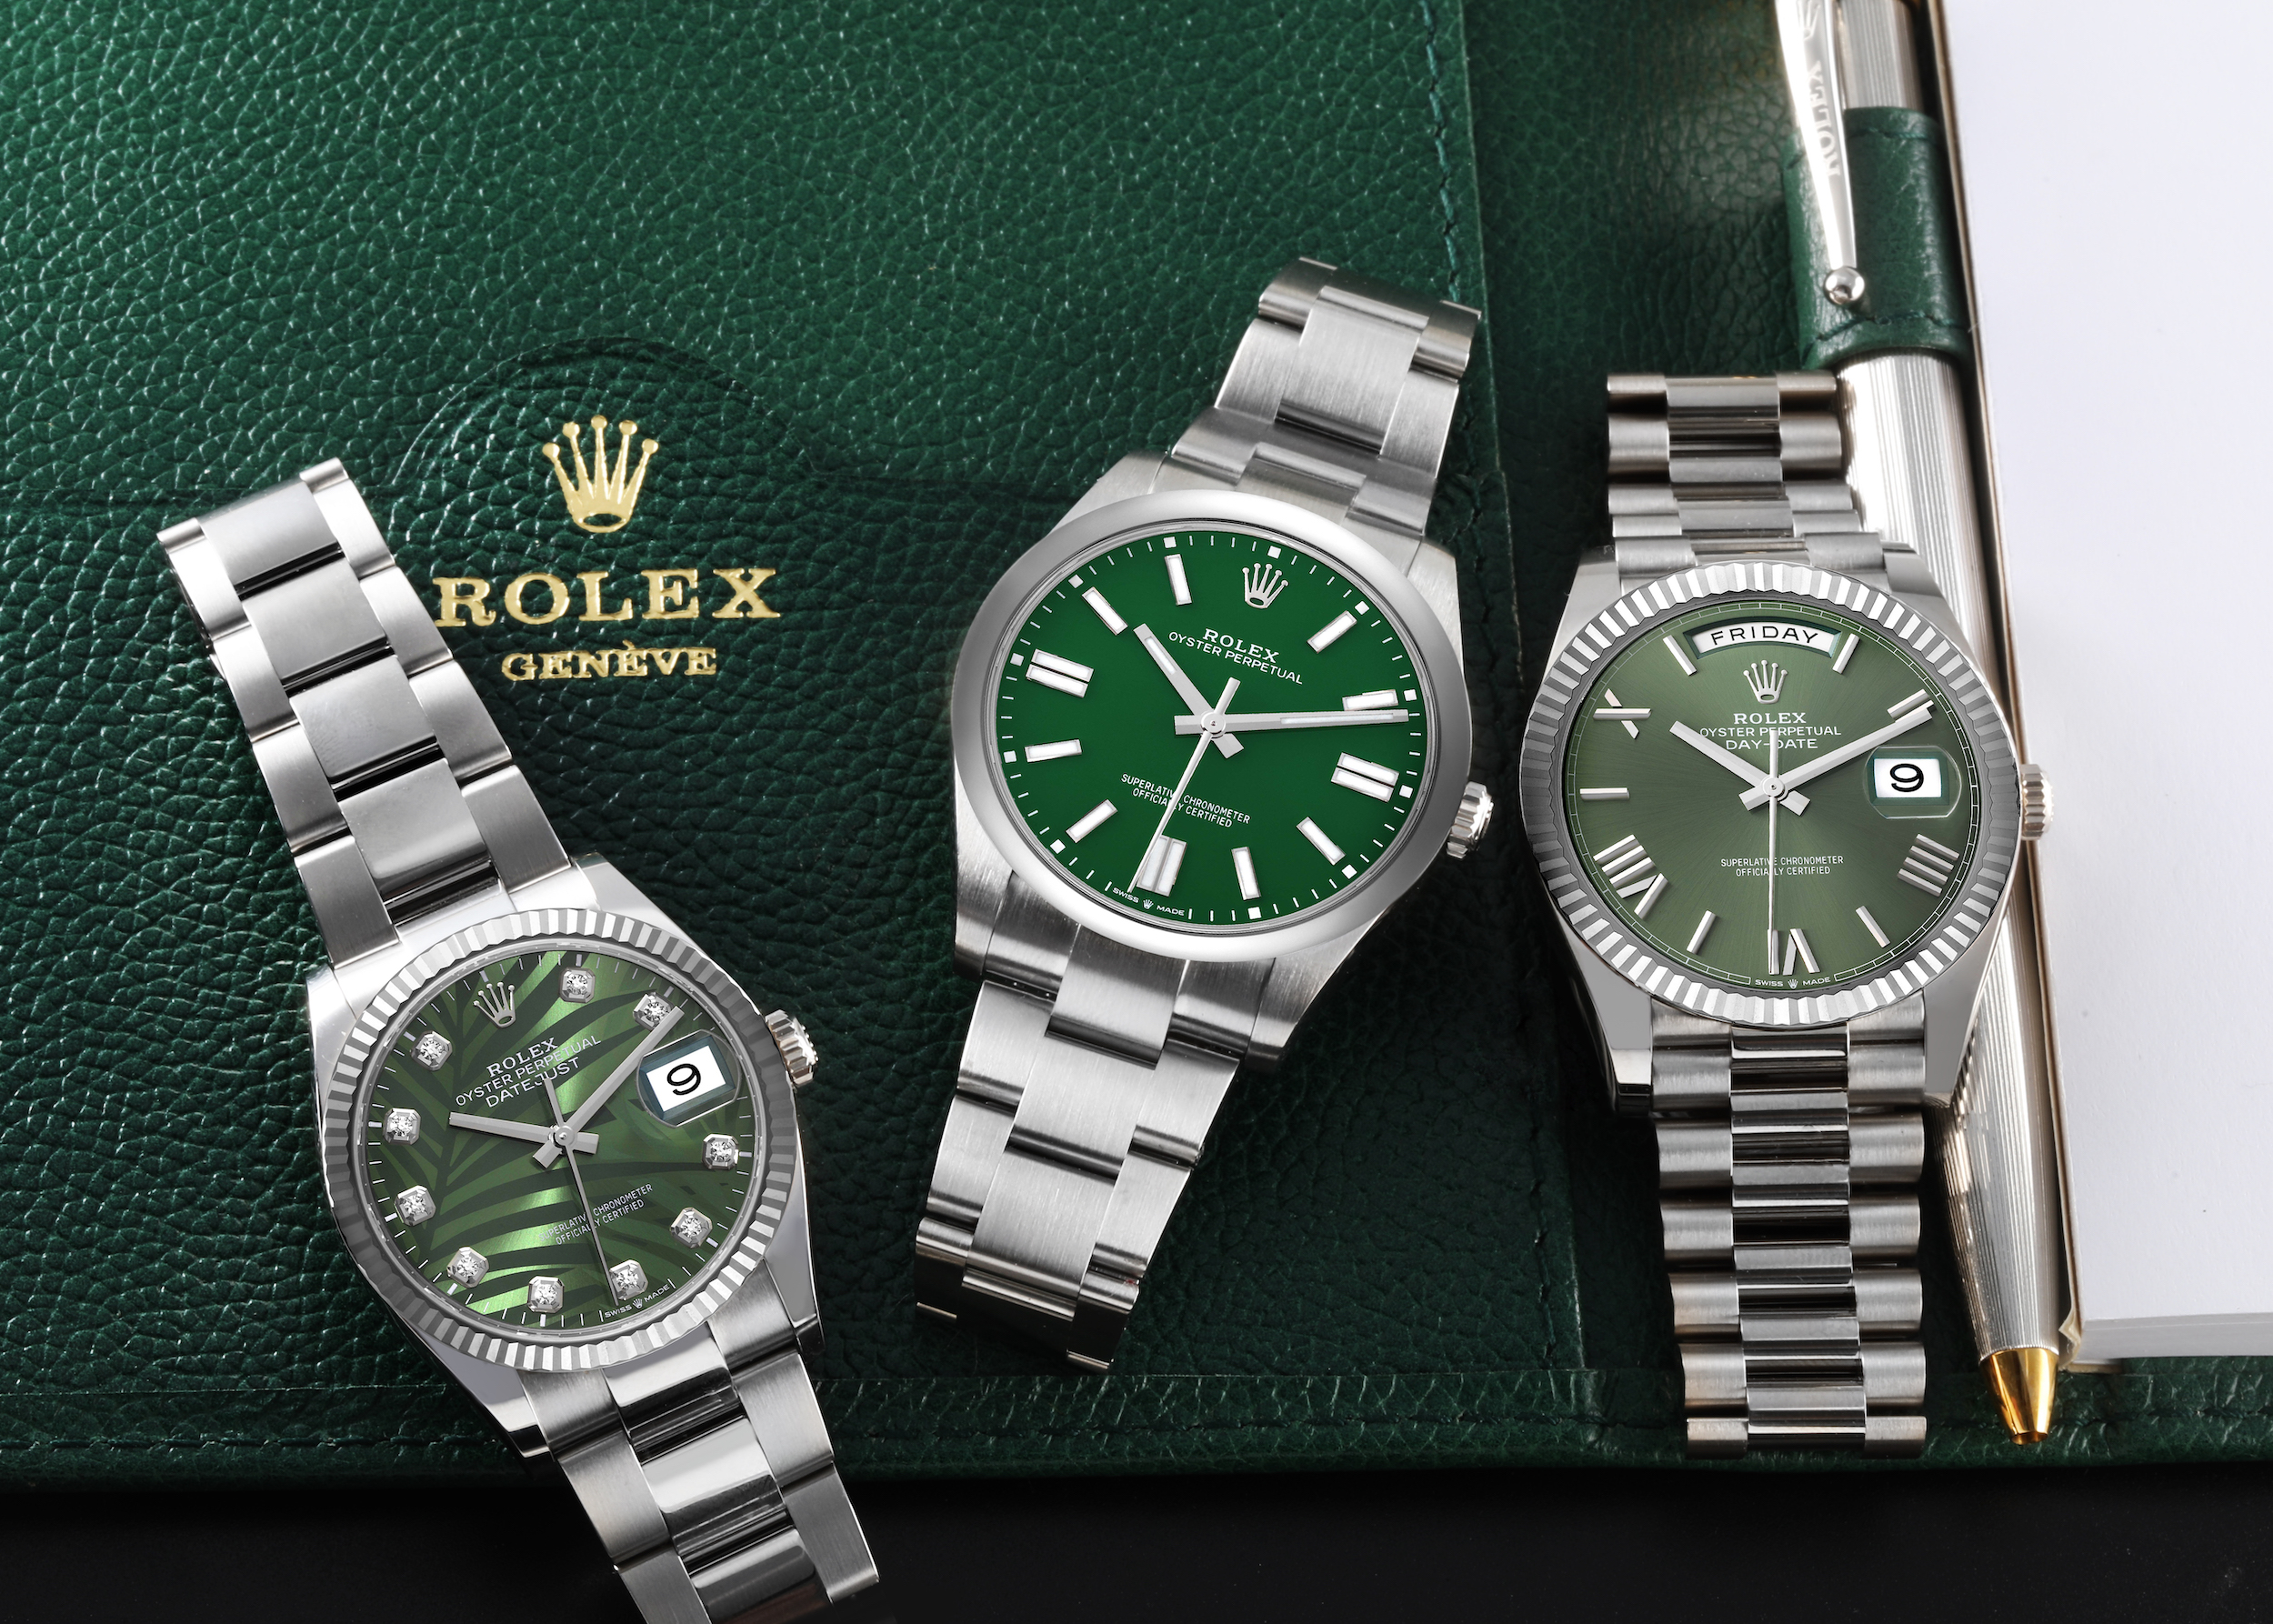 Wrist roll of the day with the stunning Rolex Submariner 116610LV